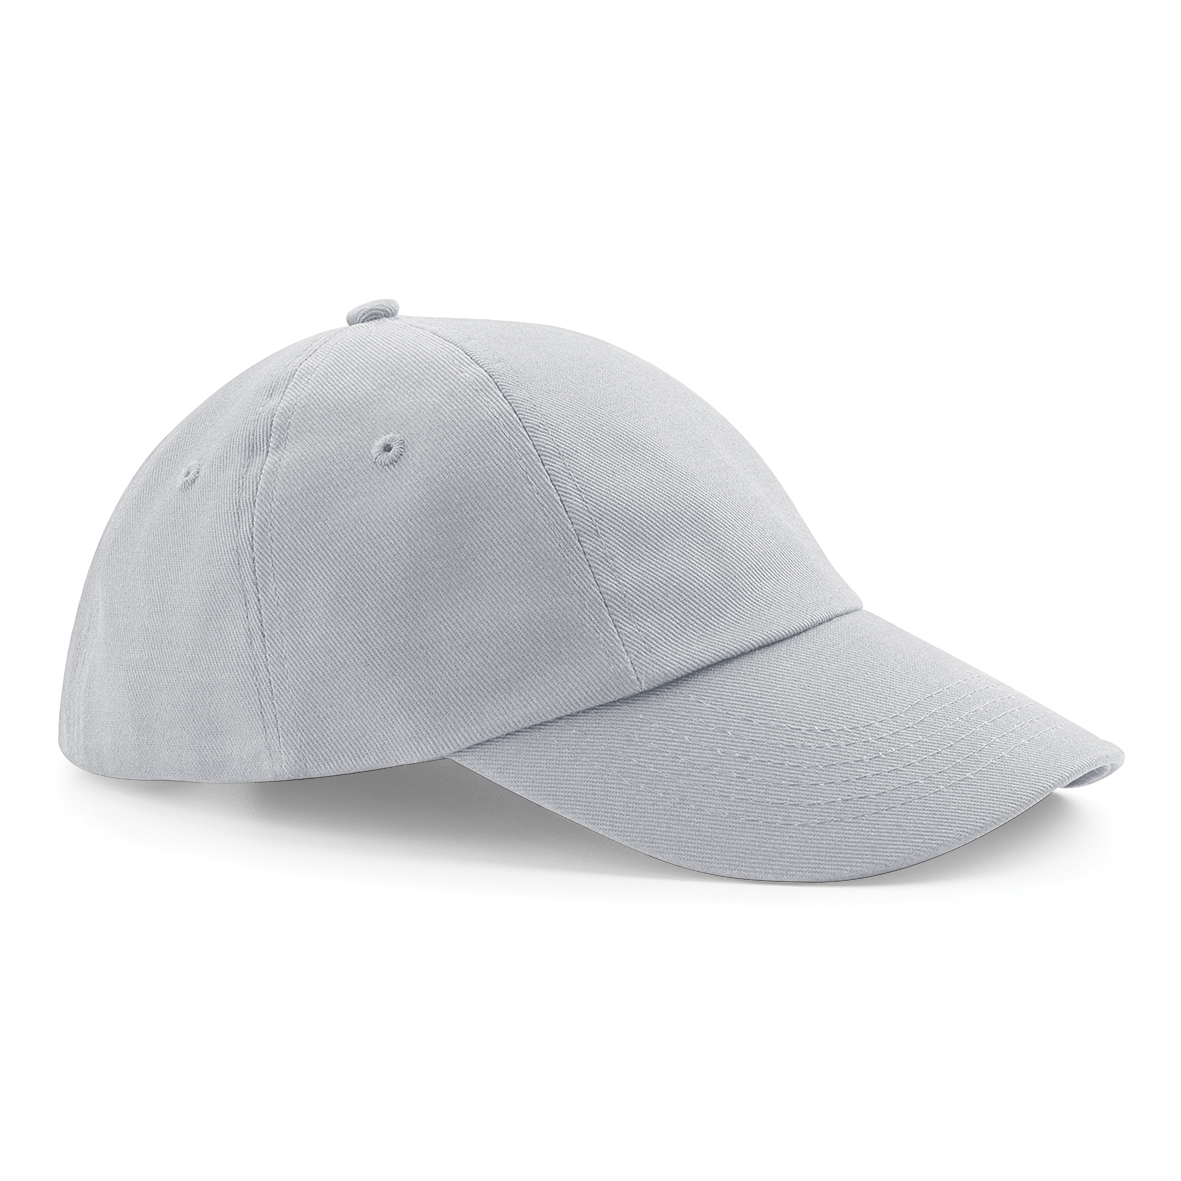 Low Profile Cap in grey with seamless, centralised front panel